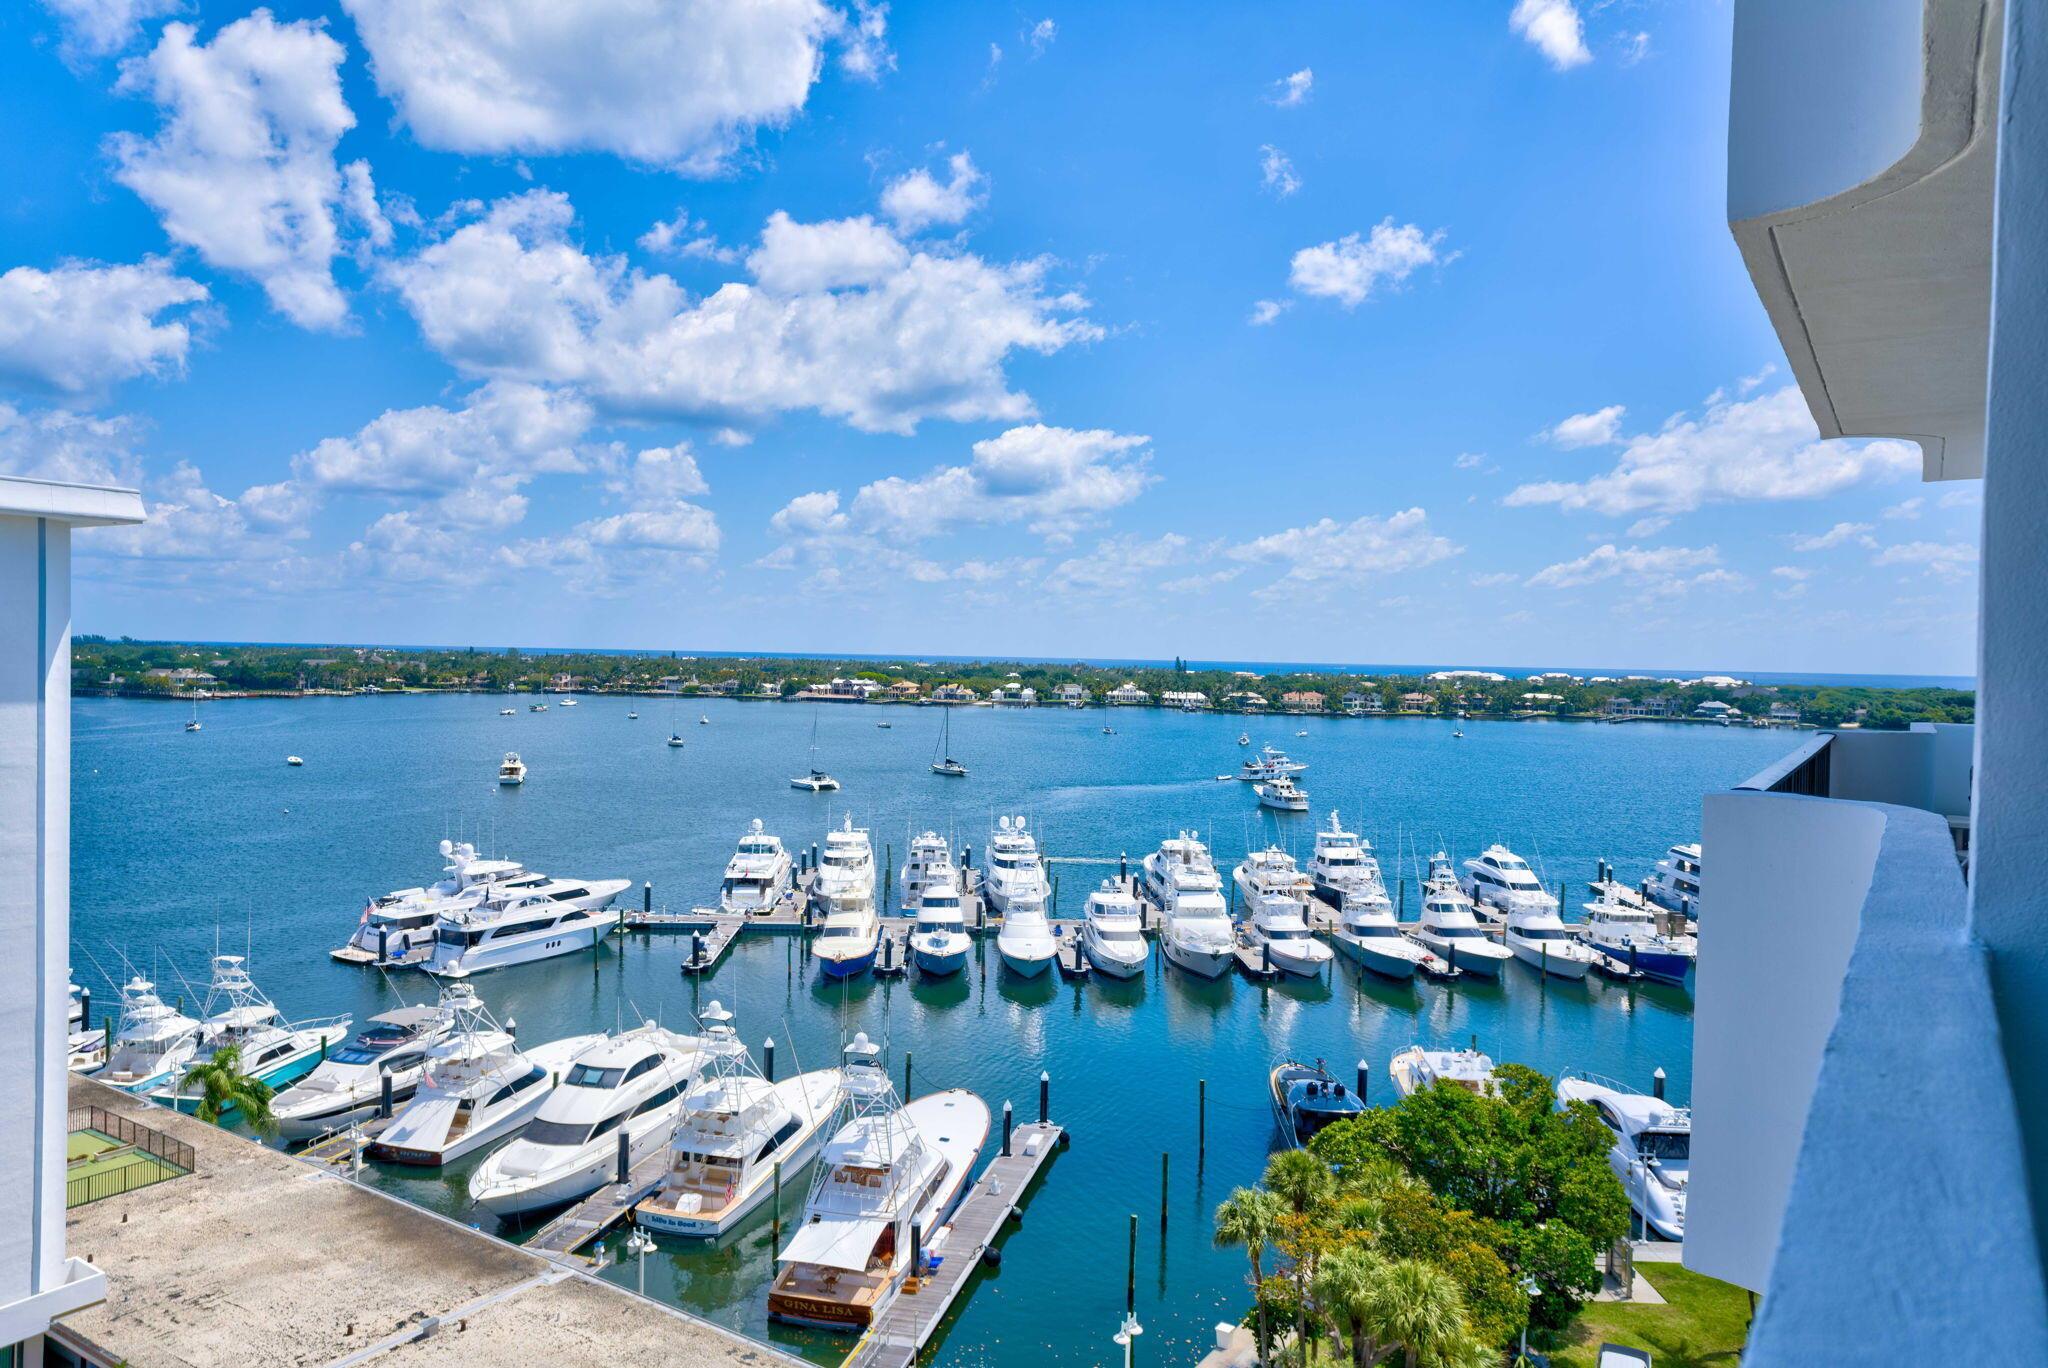 Welcome to luxurious waterfront living with Million Dollar Views. This high floor unit offers breathtaking Intracoastal, Marina, and Ocean views.  Watch the sun rise over the Ocean with a cup of coffee or unwind in the evening with a glass of wine as the boats return to the marina.This Dog Friendly building is nestled in the exclusive gated community of Old Port Cove. The community offers residents a host of amenities, including Belles Bar & Grille onsite, a heated waterfront pool, tennis courts, 24-hour security and more. With its convenient location just minutes from pristine beaches, world-class dining, and shopping, this condo truly offers the best of waterfront living in North Palm Beach.Don't miss your opportunity to experience luxury living at its finest.